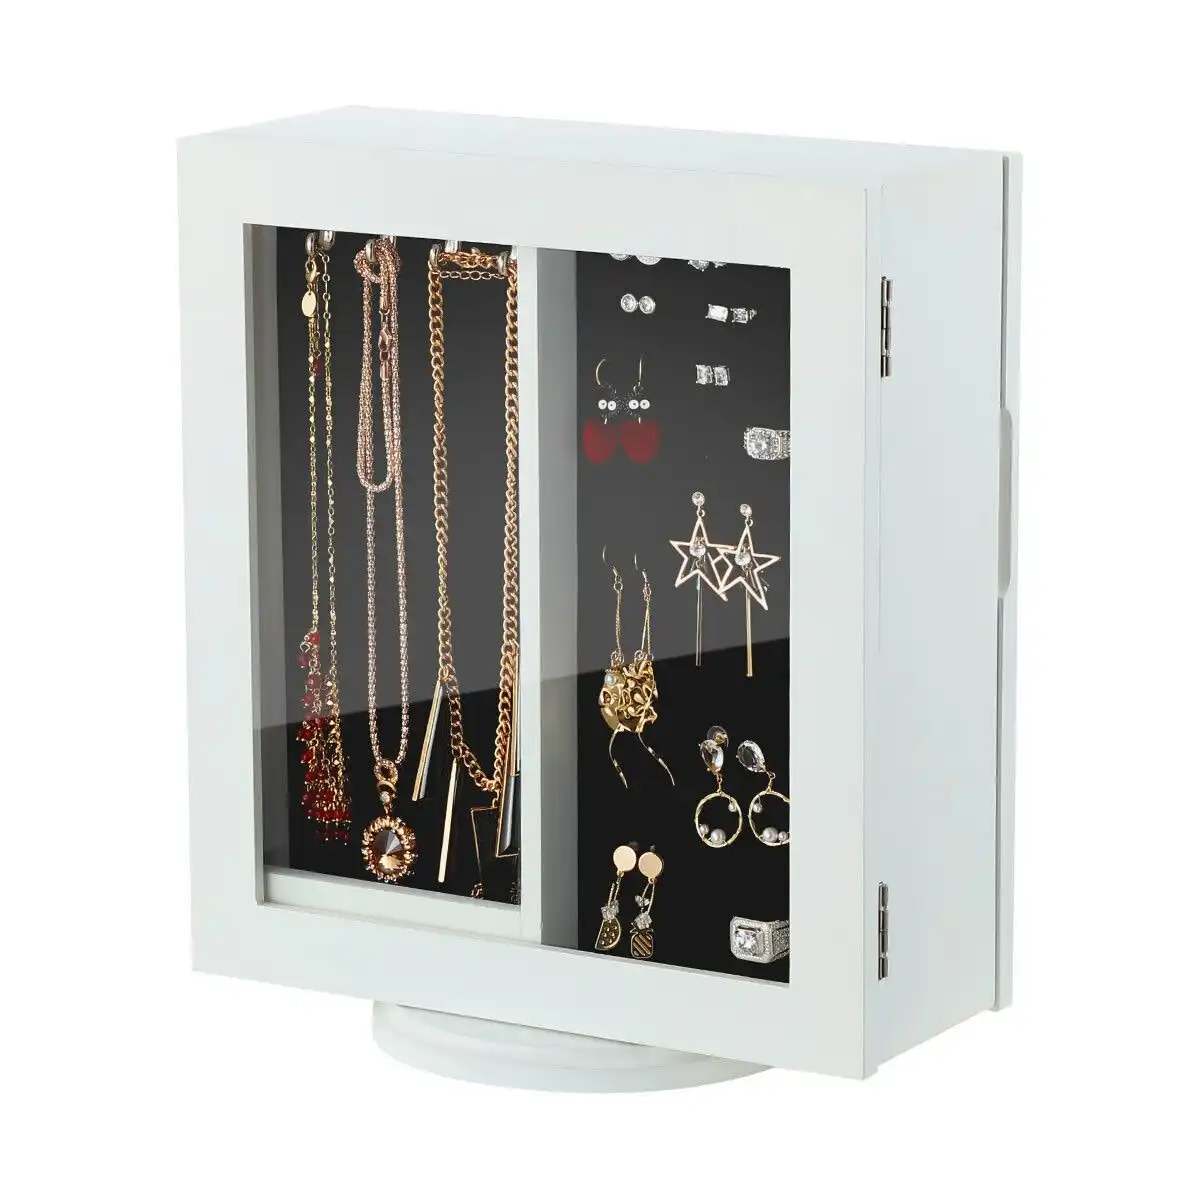 Ausway 360 Degree Rotating Jewellery Cabinet Organiser Mirror Jewelry Cabinet Box for Earring Necklace Ring White